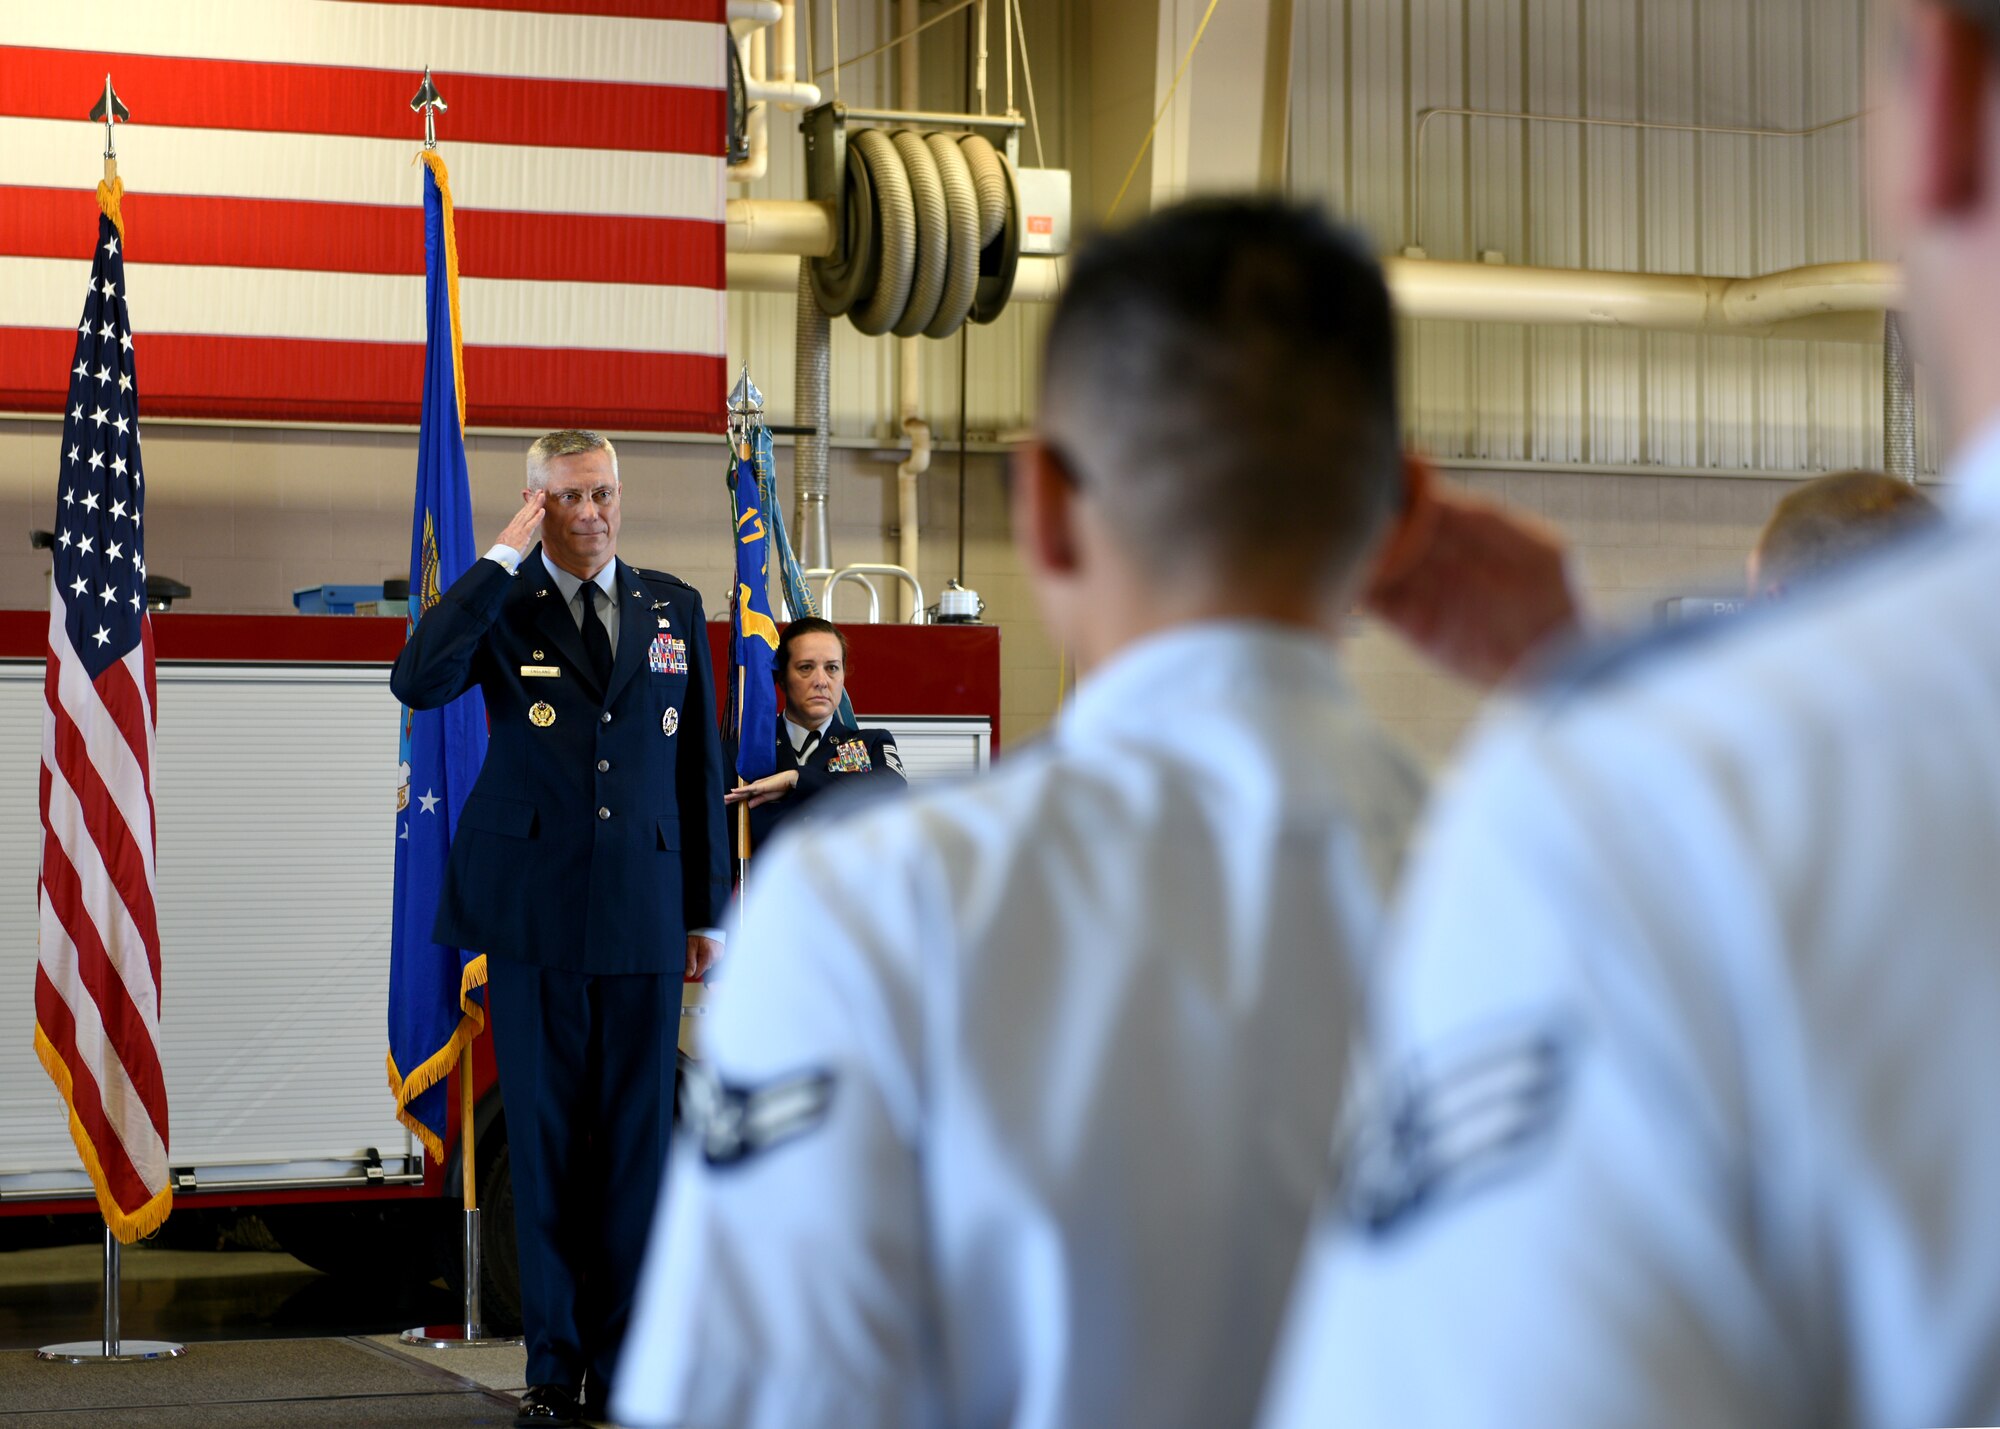 U.S. Air Force Col. Tony England, 17th Mission Support Group incoming commander, renders his first salute during the change of command ceremony at the Transportation Complex on Goodfellow Air Force Base, Texas, June 20, 2019. The 17th MSG maintains the largest Secret Internet Protocol Router network in Air Education Training Command and the largest fire truck fleet in the Air Force. (U.S. Air Force photo by Airman 1st Class Robyn Hunsinger/Released)